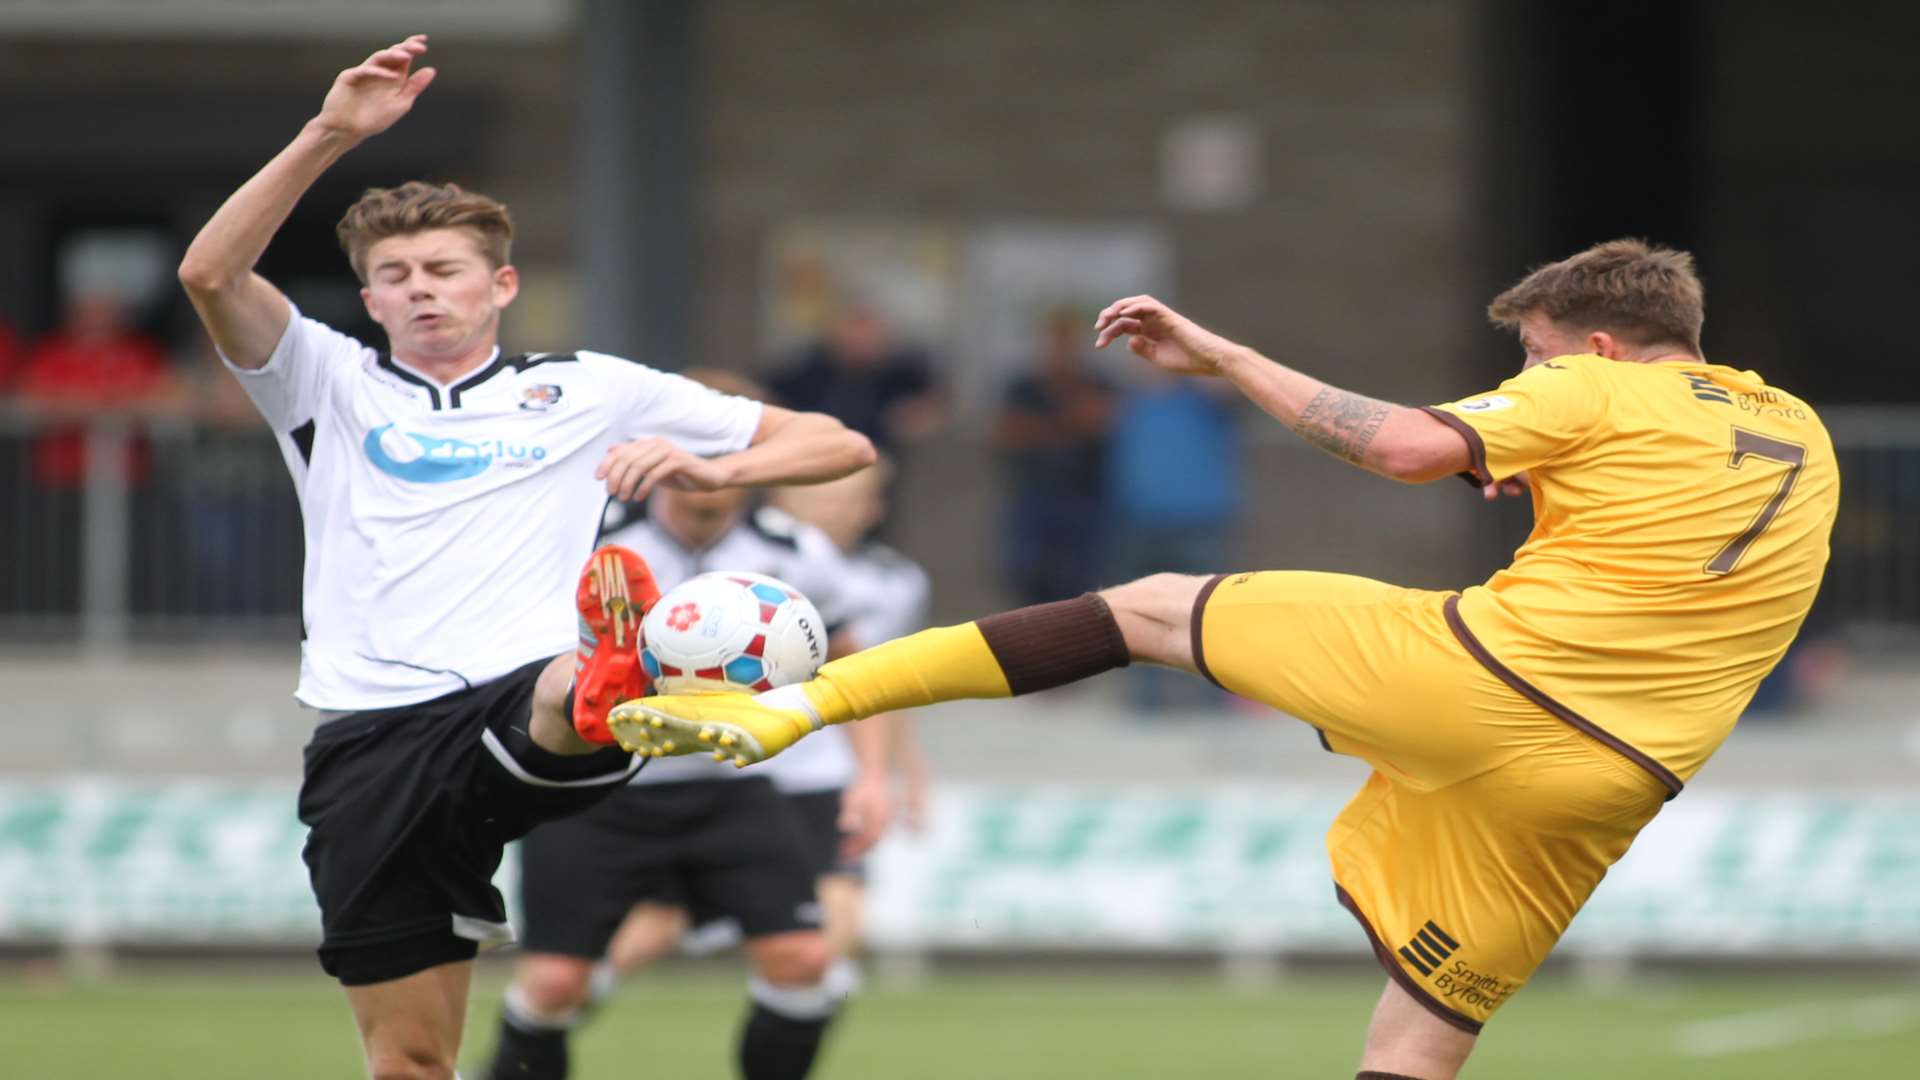 Dartford FC assistant manager Paul Sawyer expecting a battle at Concord ...